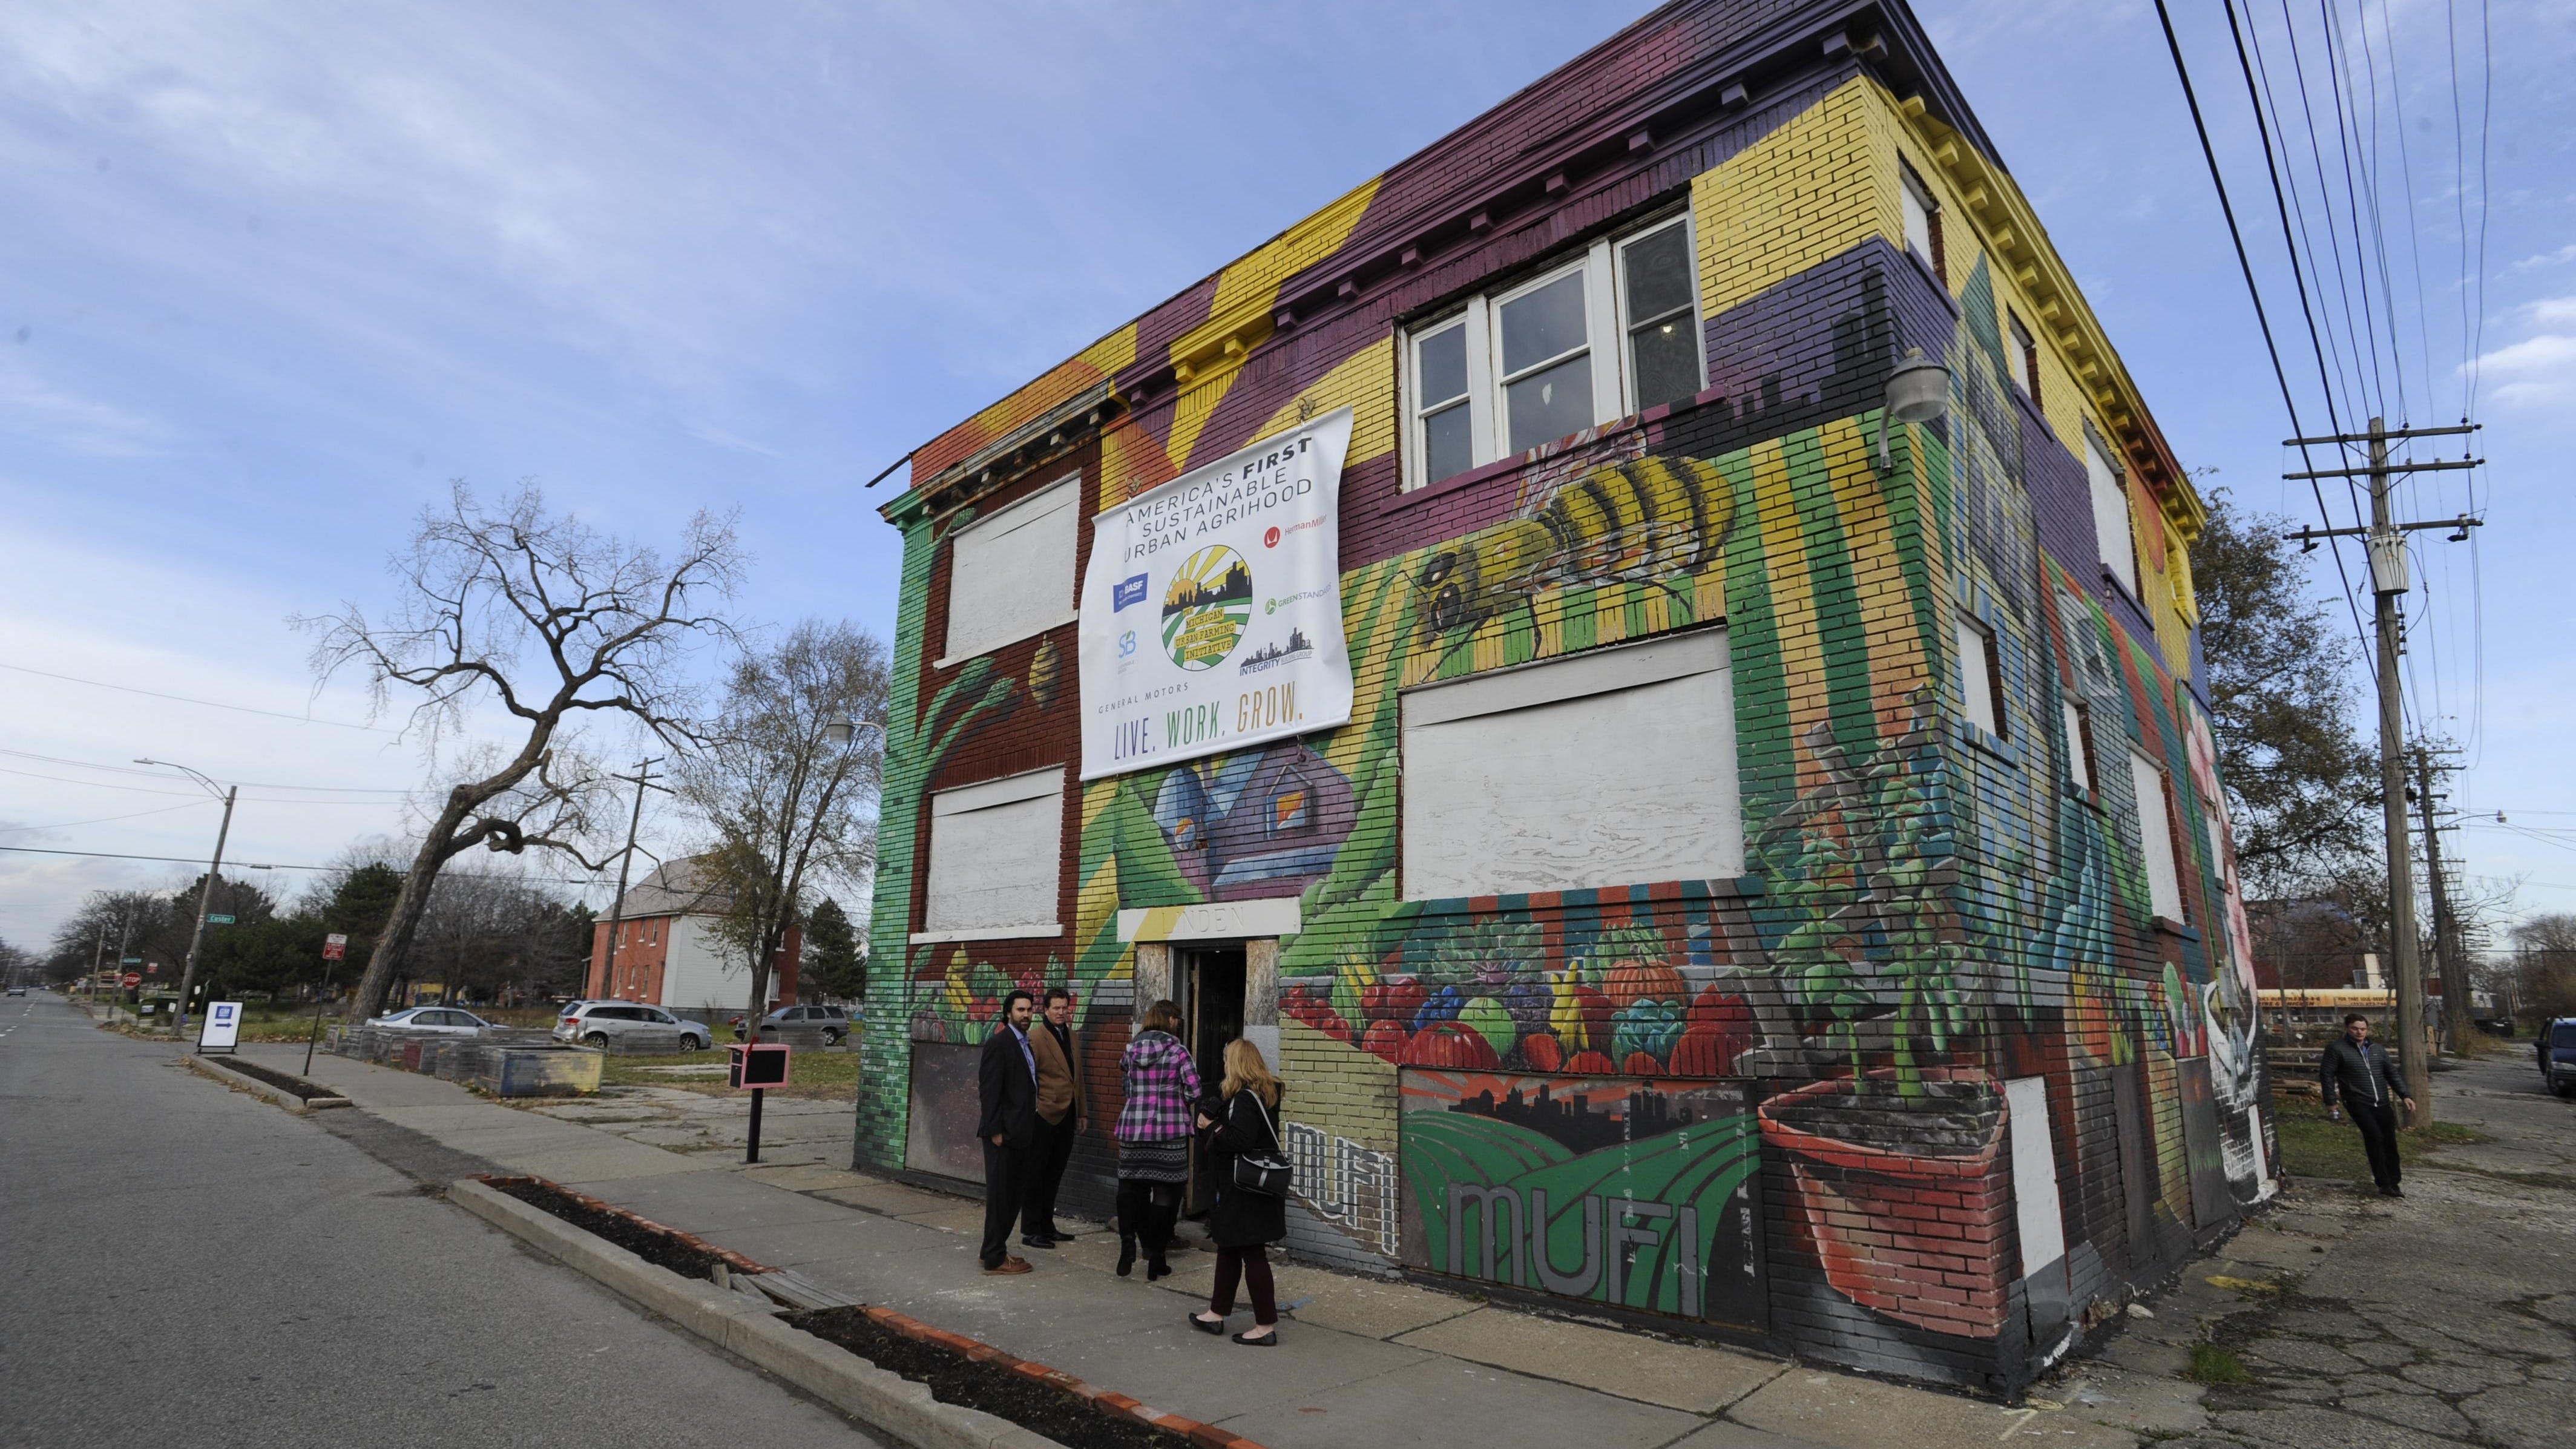 The Michigan Urban Farming Initiative is developing what it says is the nation’s first sustainable “agrihood” on Detroit’s north side.